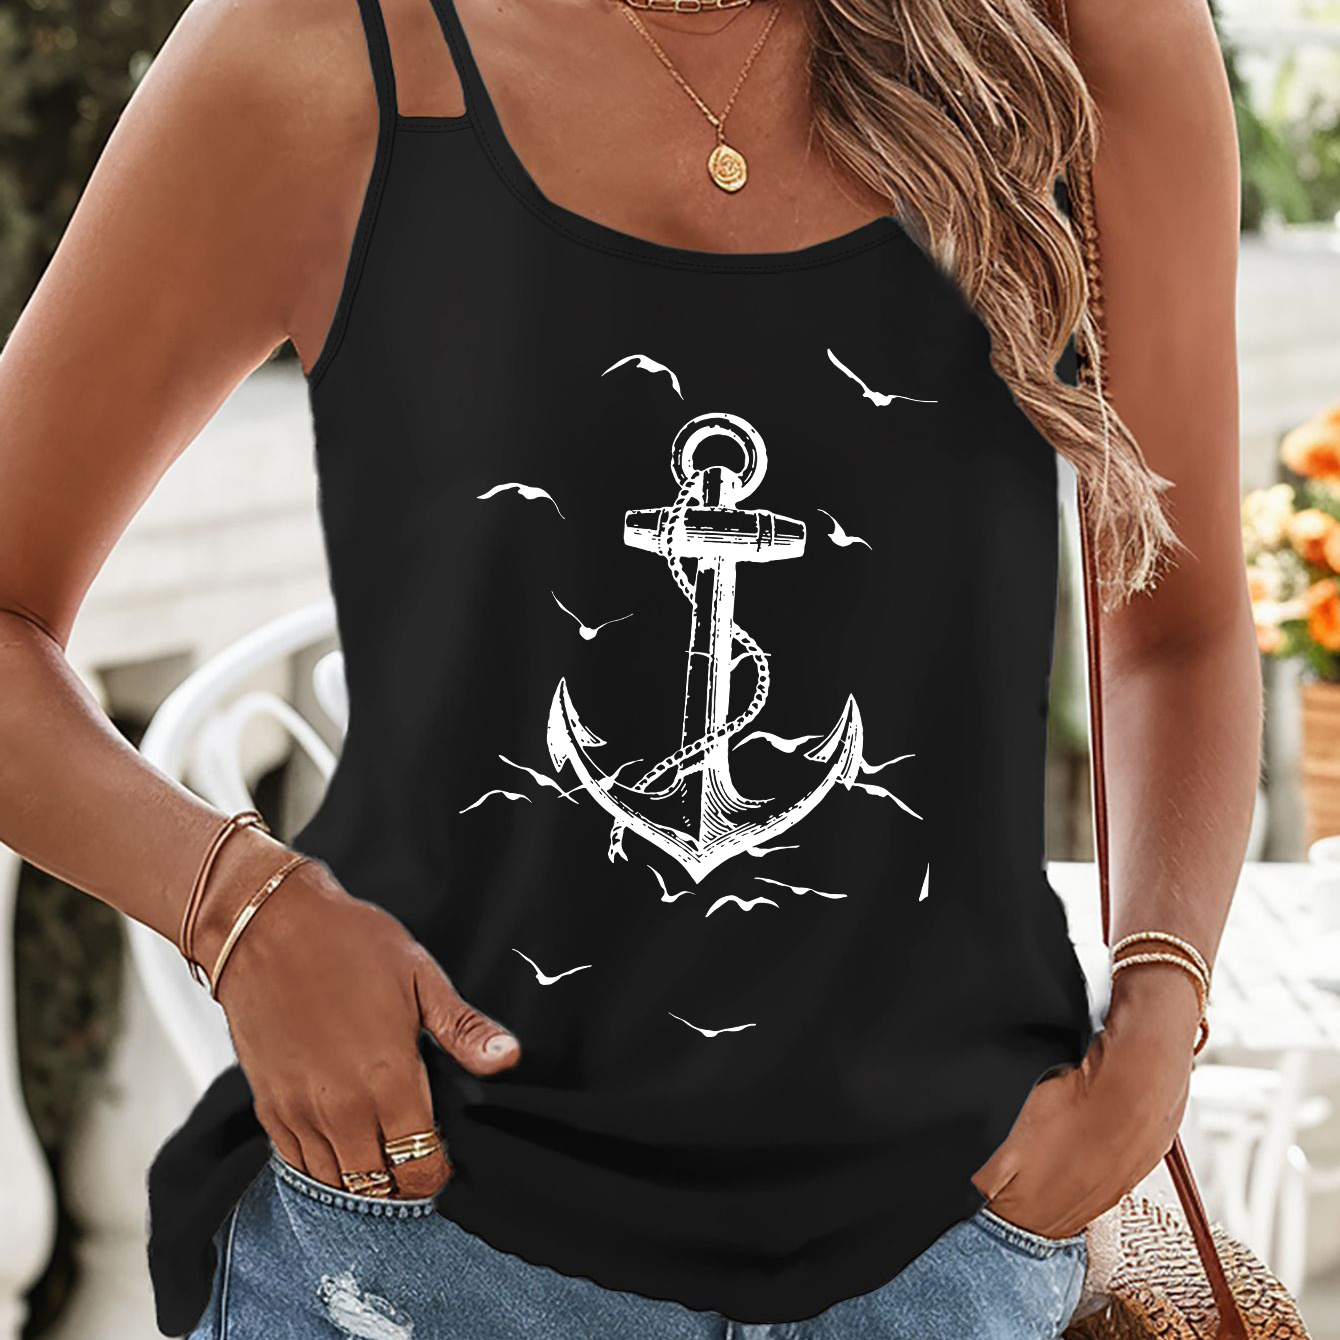 

Ship's Anchor Print Double Straps Top, Casual Sleeveless Cami Top For Summer, Women's Clothing